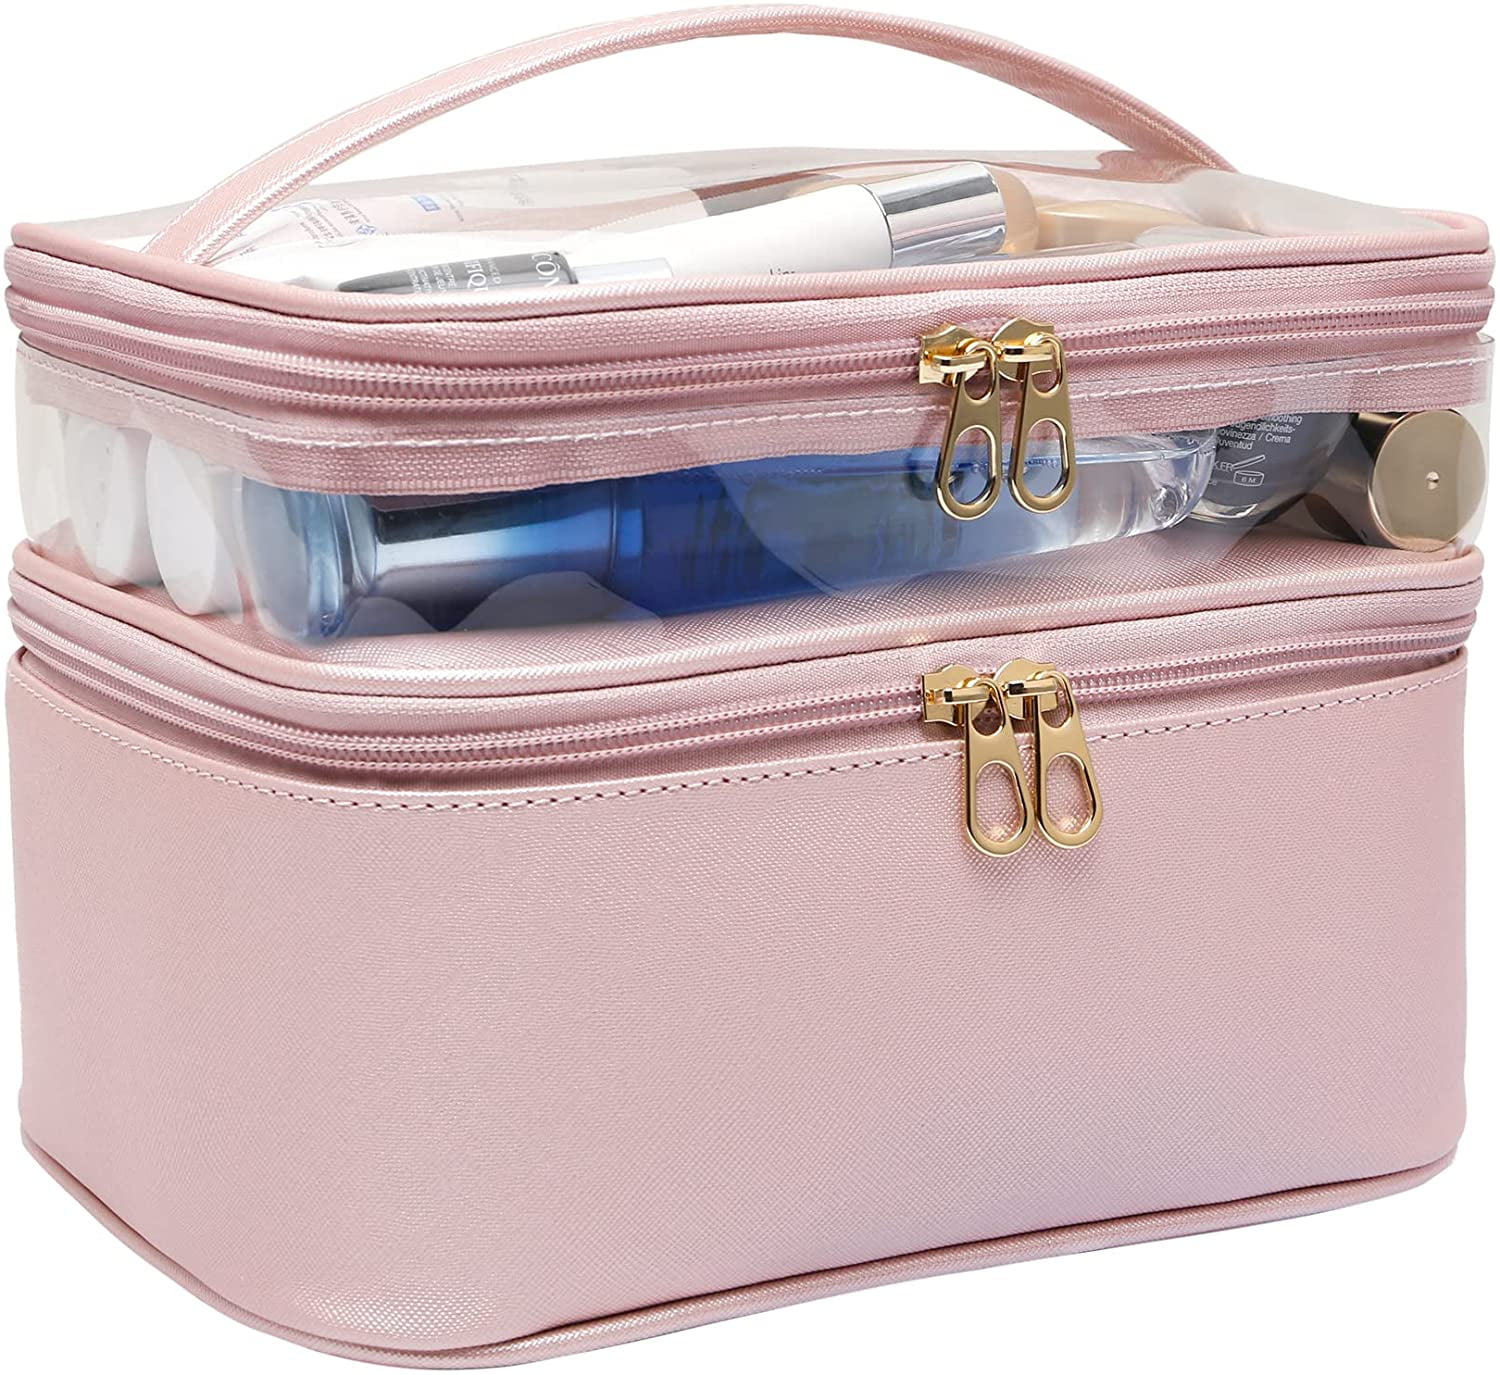 Minimalist Speciality Makeup Case Large Capacity Cosmetic Bag With Two  Removable Dividers, Portable Makeup Bag With Handle,Durable Waterproof Make  Up